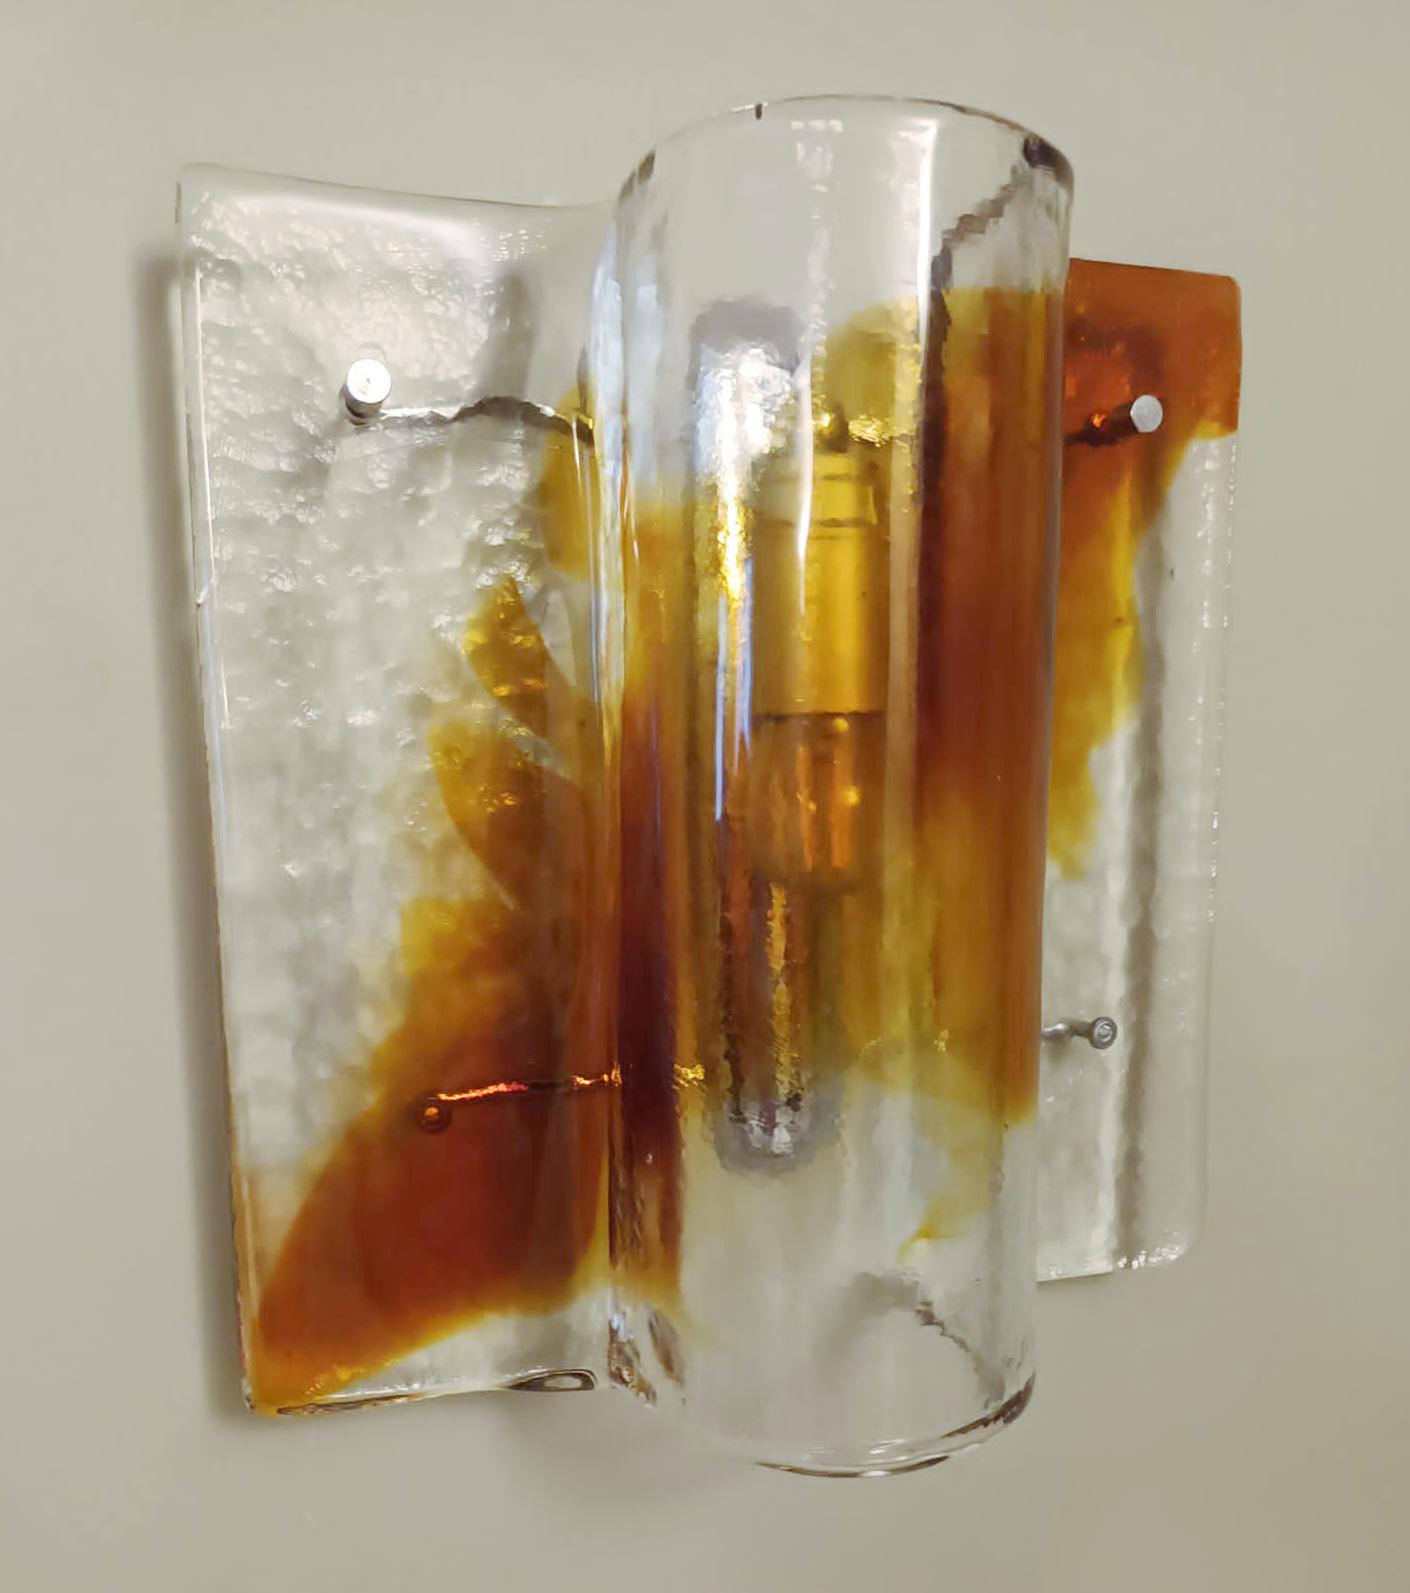 Pair of Italian wall lights with clear and amber Murano glass shades mounted on chrome brackets / Made in Italy by Mazzega, circa 1960s
1 light / E12 or E14 type / max 40W
Measures: Height 12 inches, width 11.5 inches, depth 5 inches
1 pair